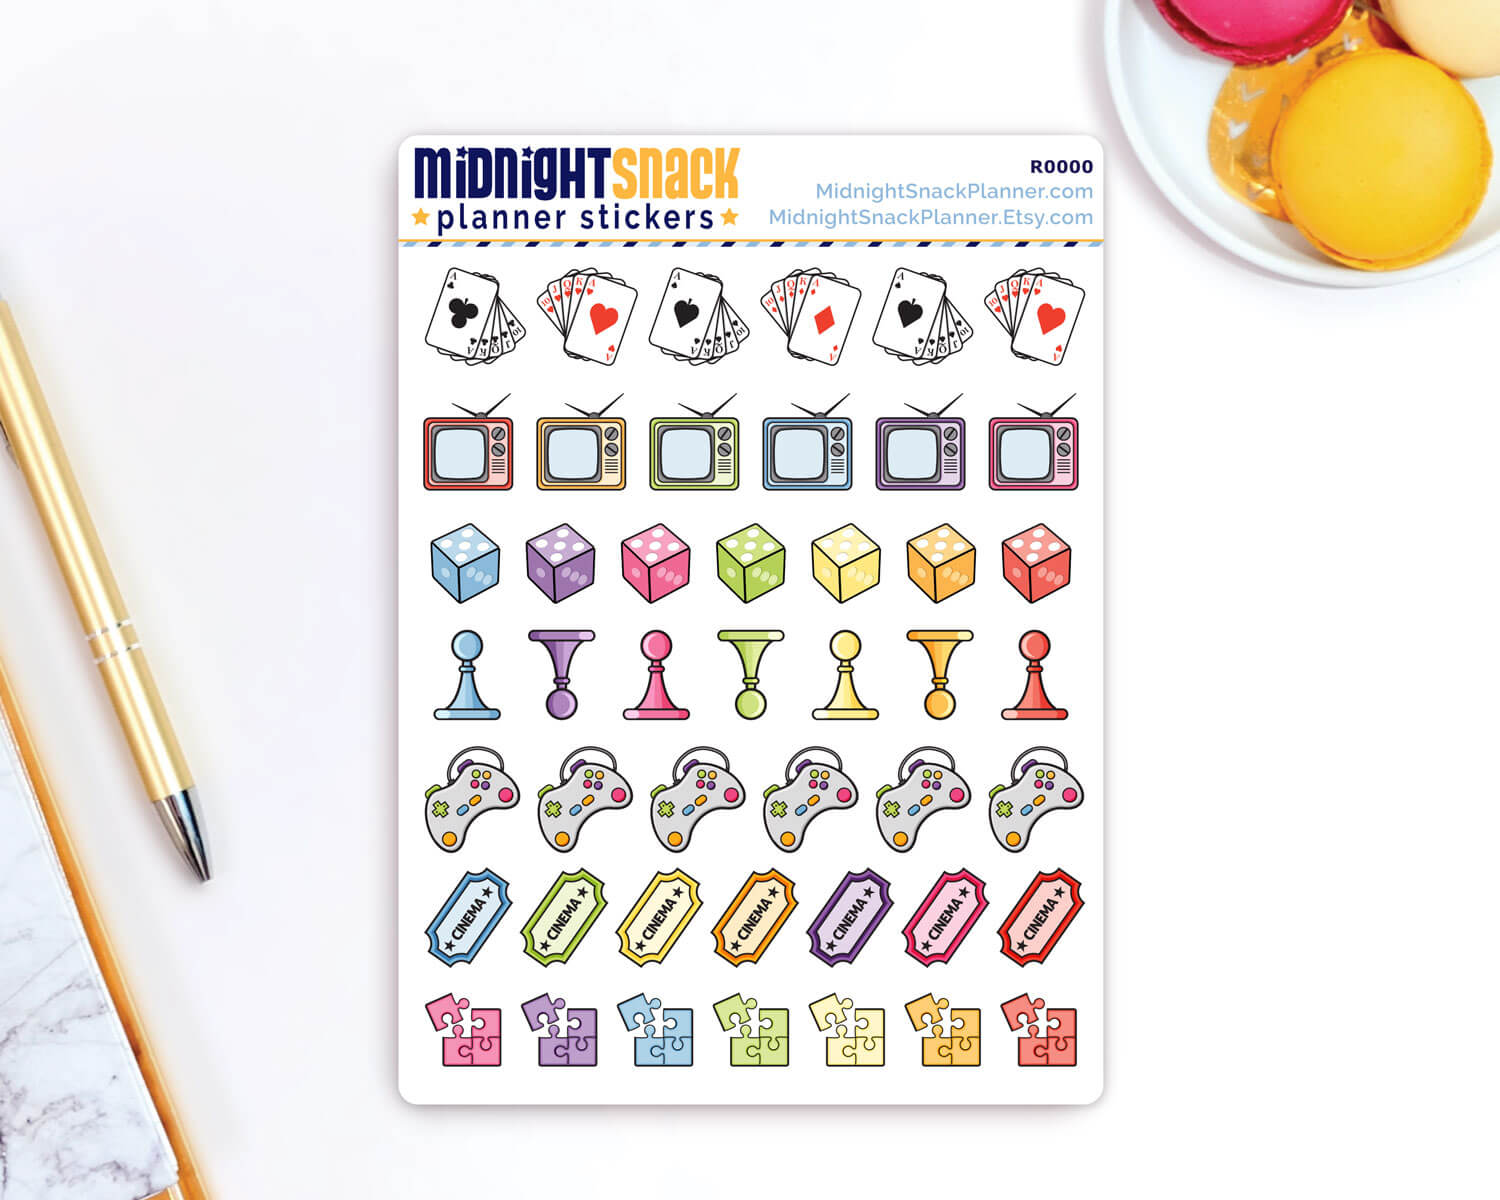 Fun and Games Sampler Planner Stickers from Midnight Snack Planner